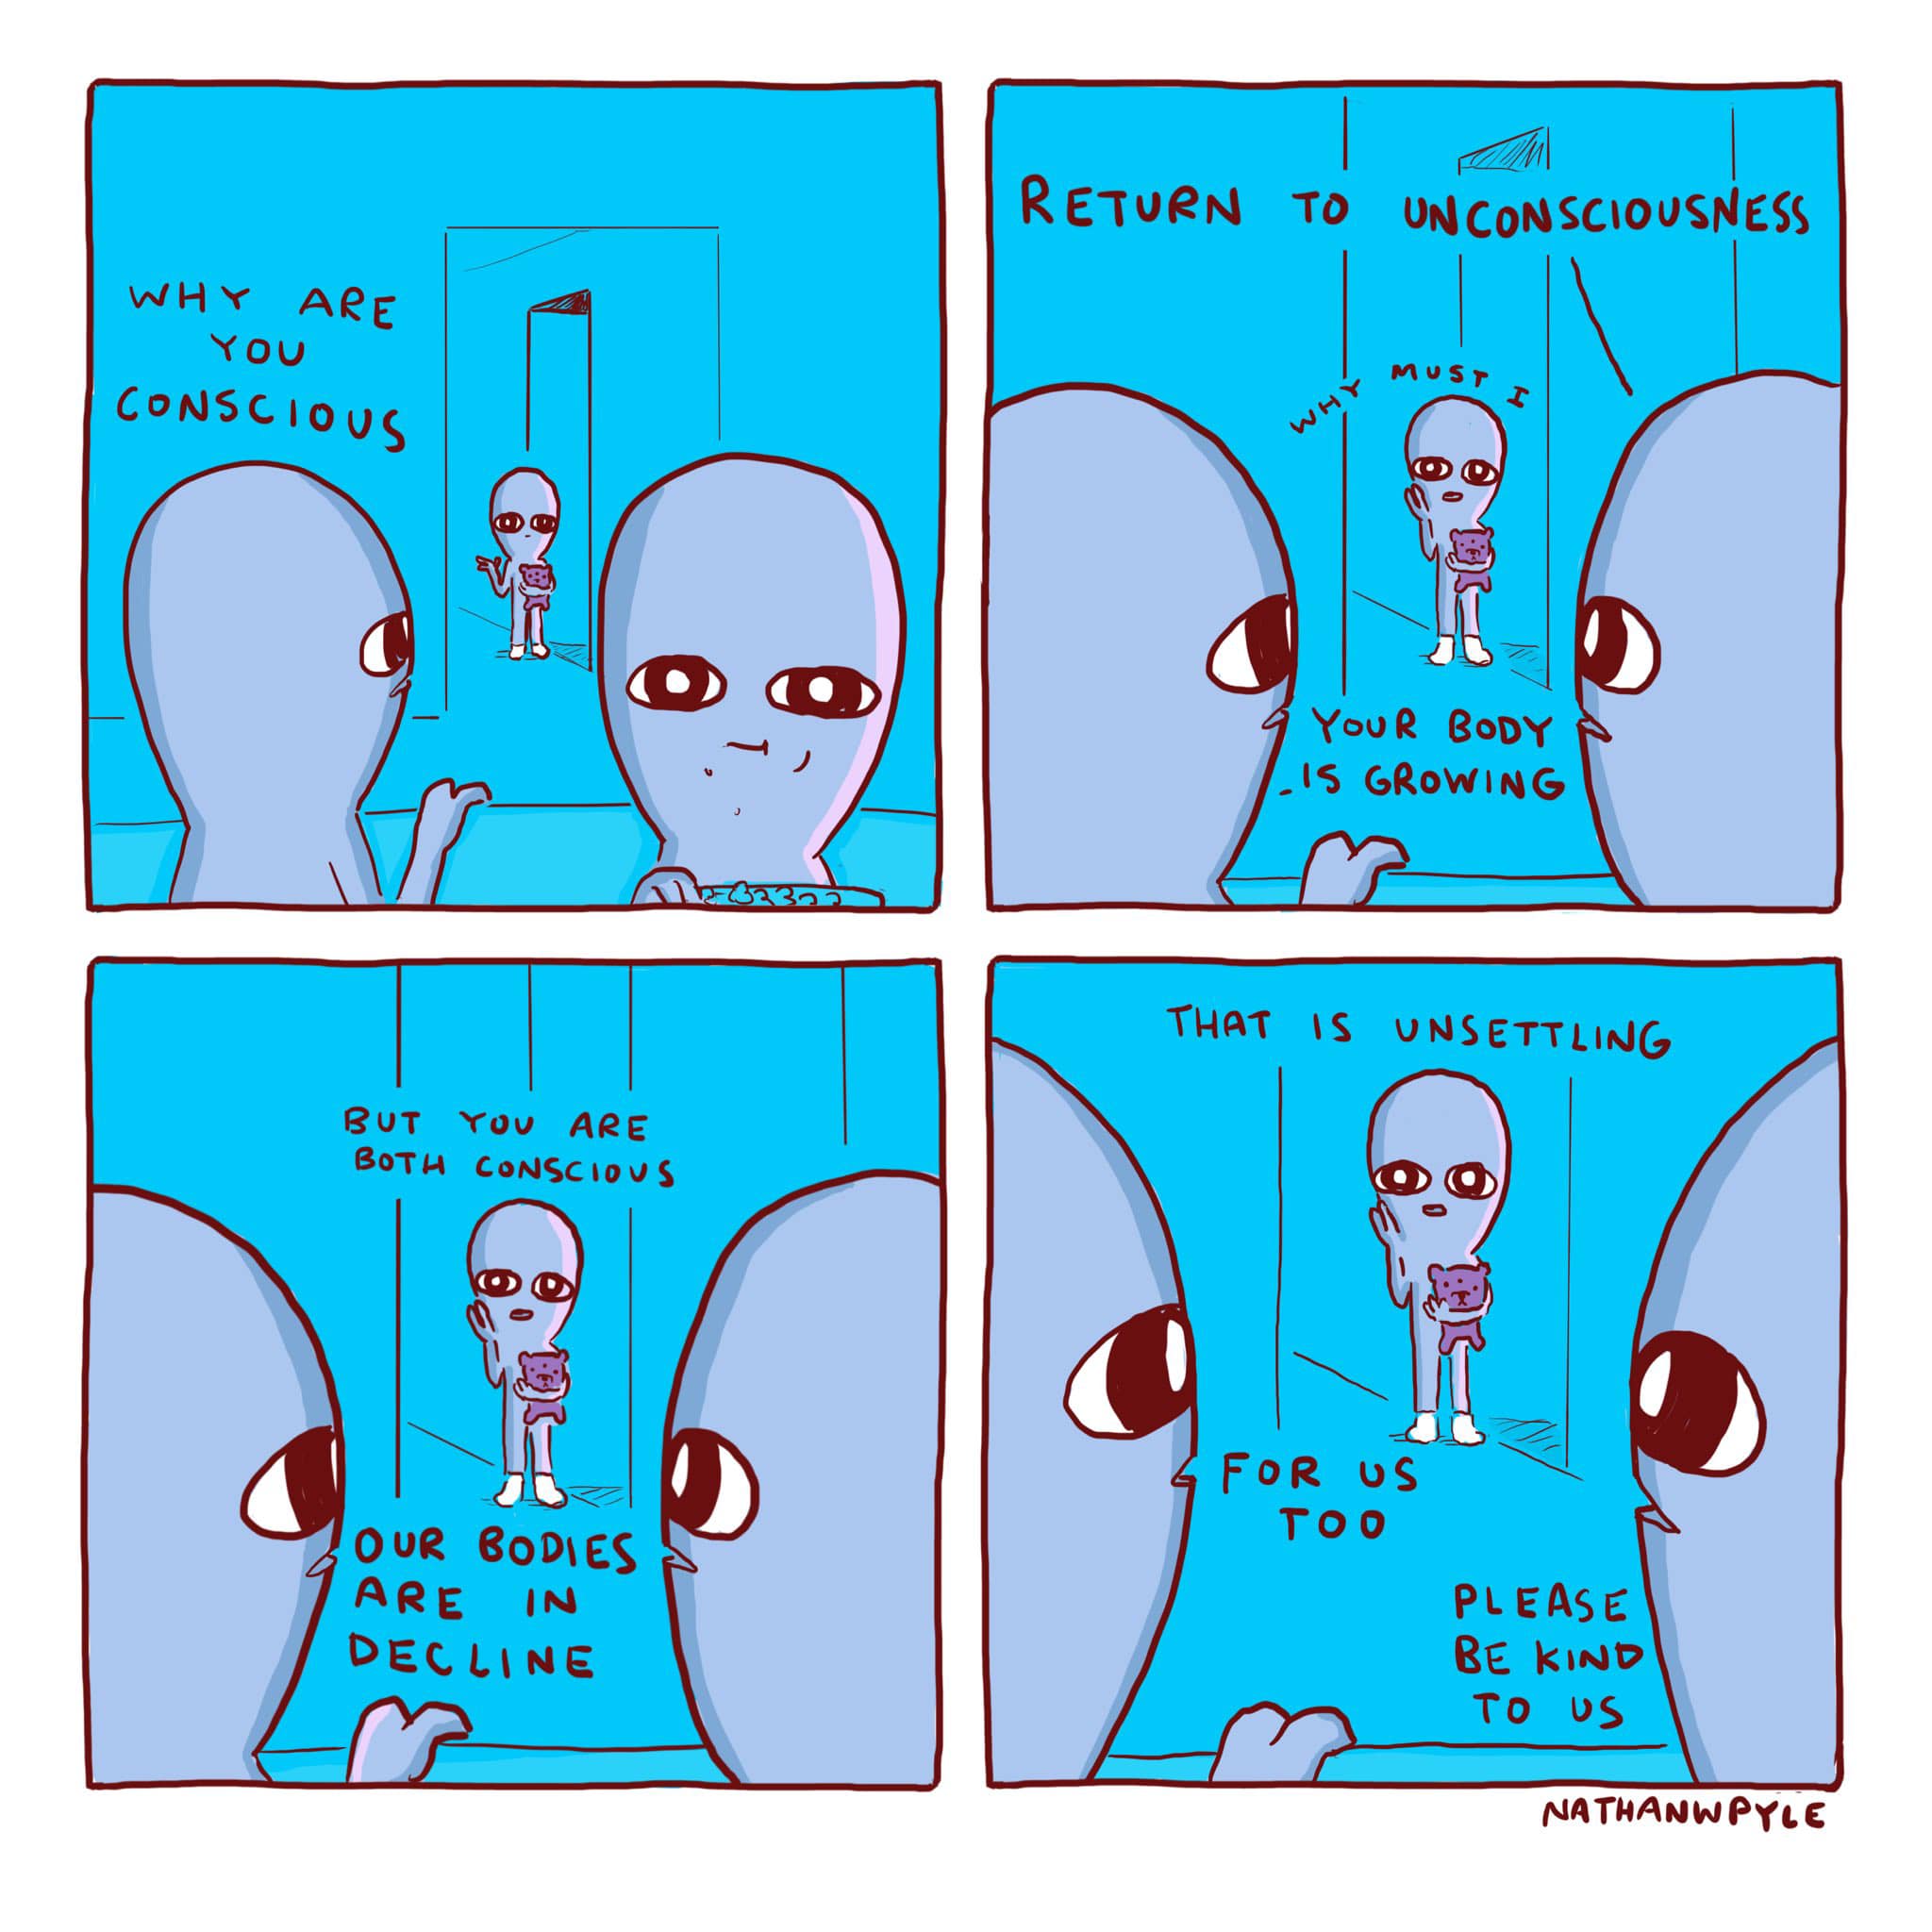 why are you conscious, return to unconsciousness, why must i, your body is growing, but you are both conscious, our bodies are in decline, that is unsettling, for us too, please be kind to us, nathanwpyle, comic